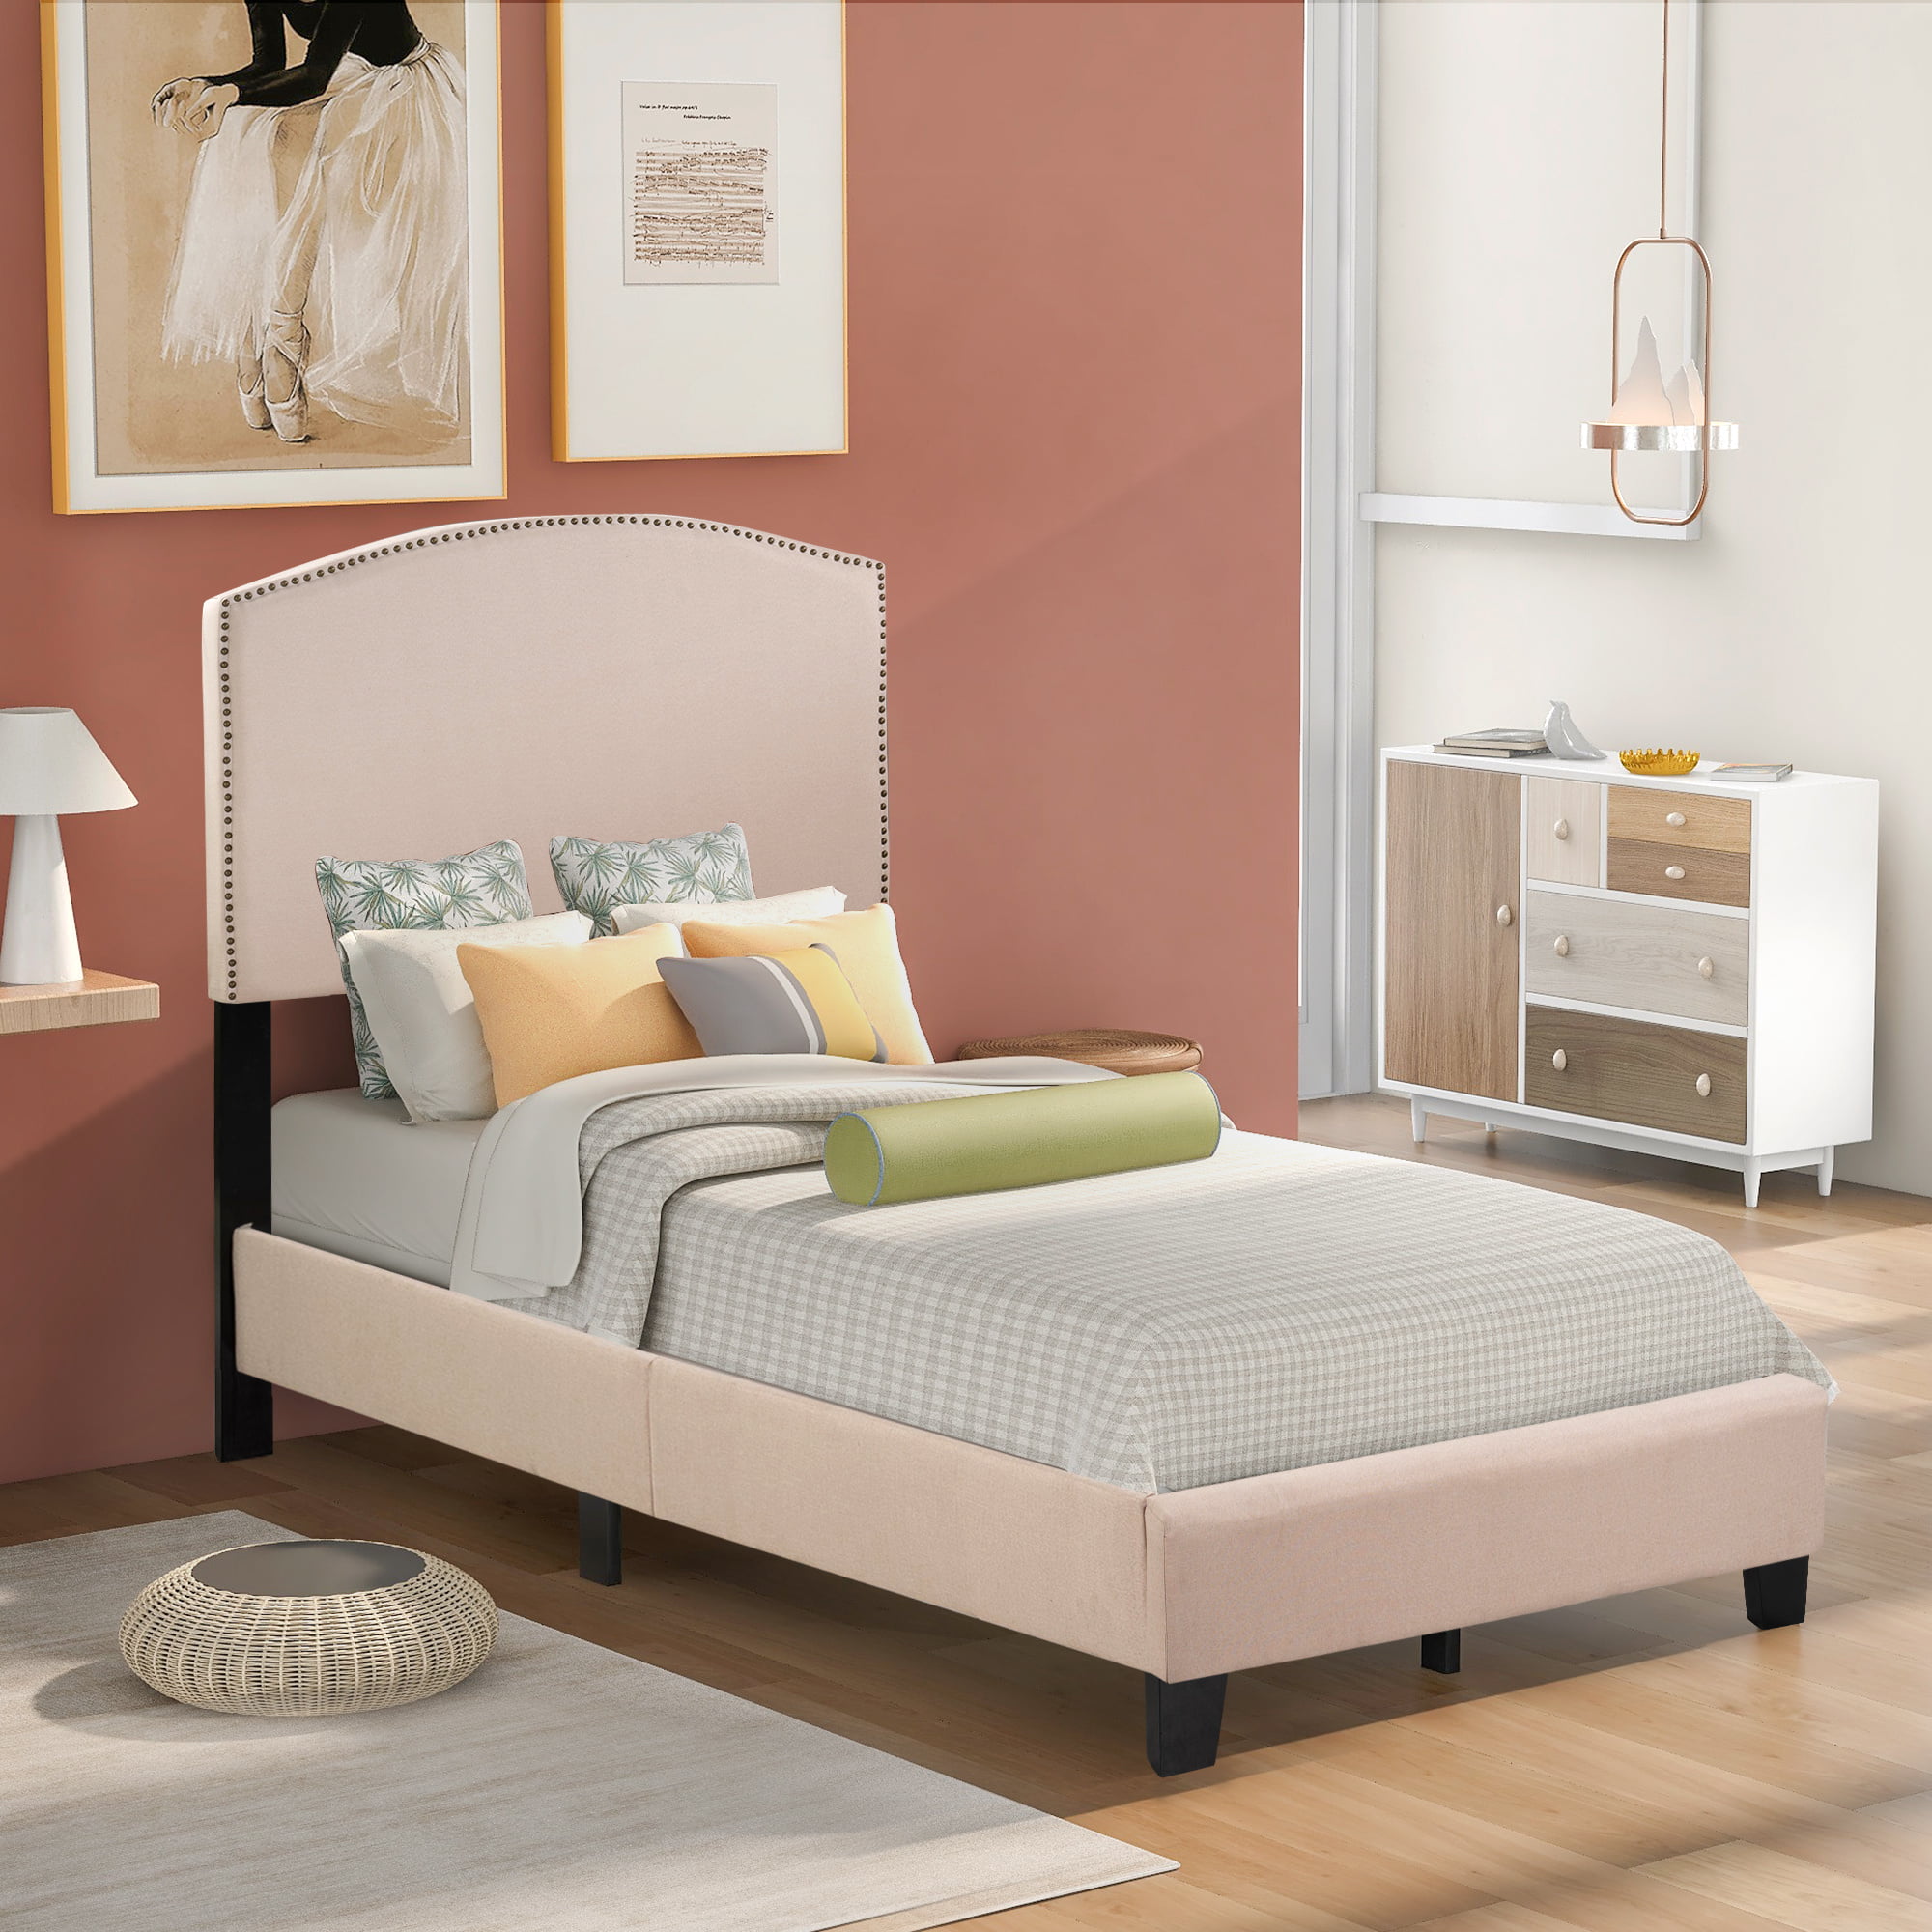 Full/Queen King Beige Platform Bed Frame with Wooden Slats and Nailhead Decro 